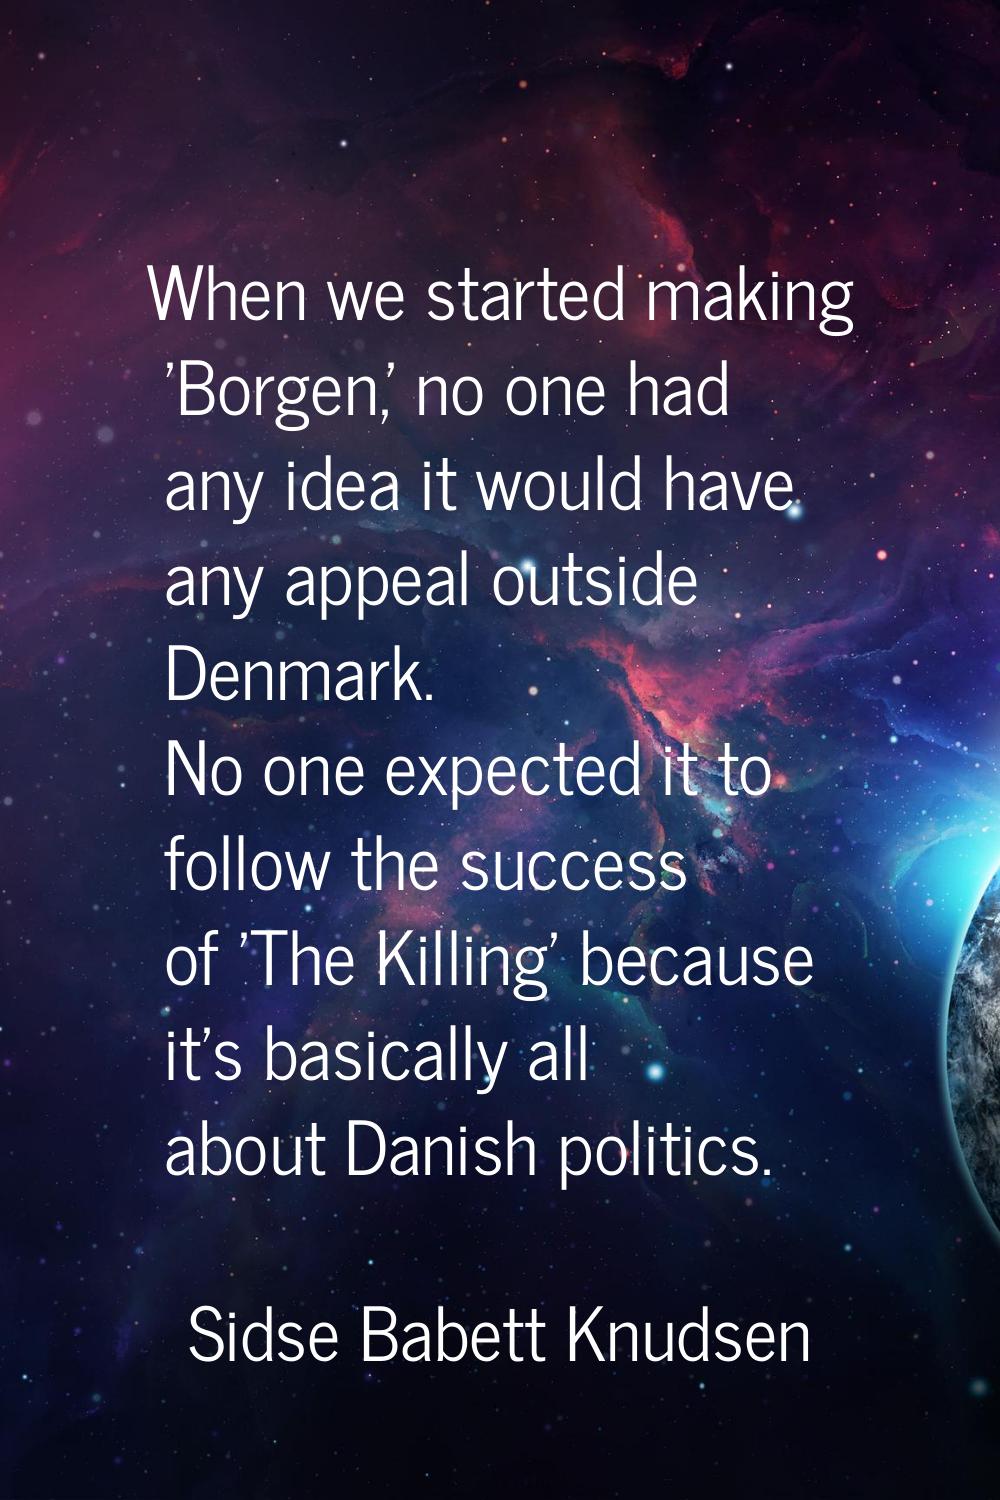 When we started making 'Borgen,' no one had any idea it would have any appeal outside Denmark. No o